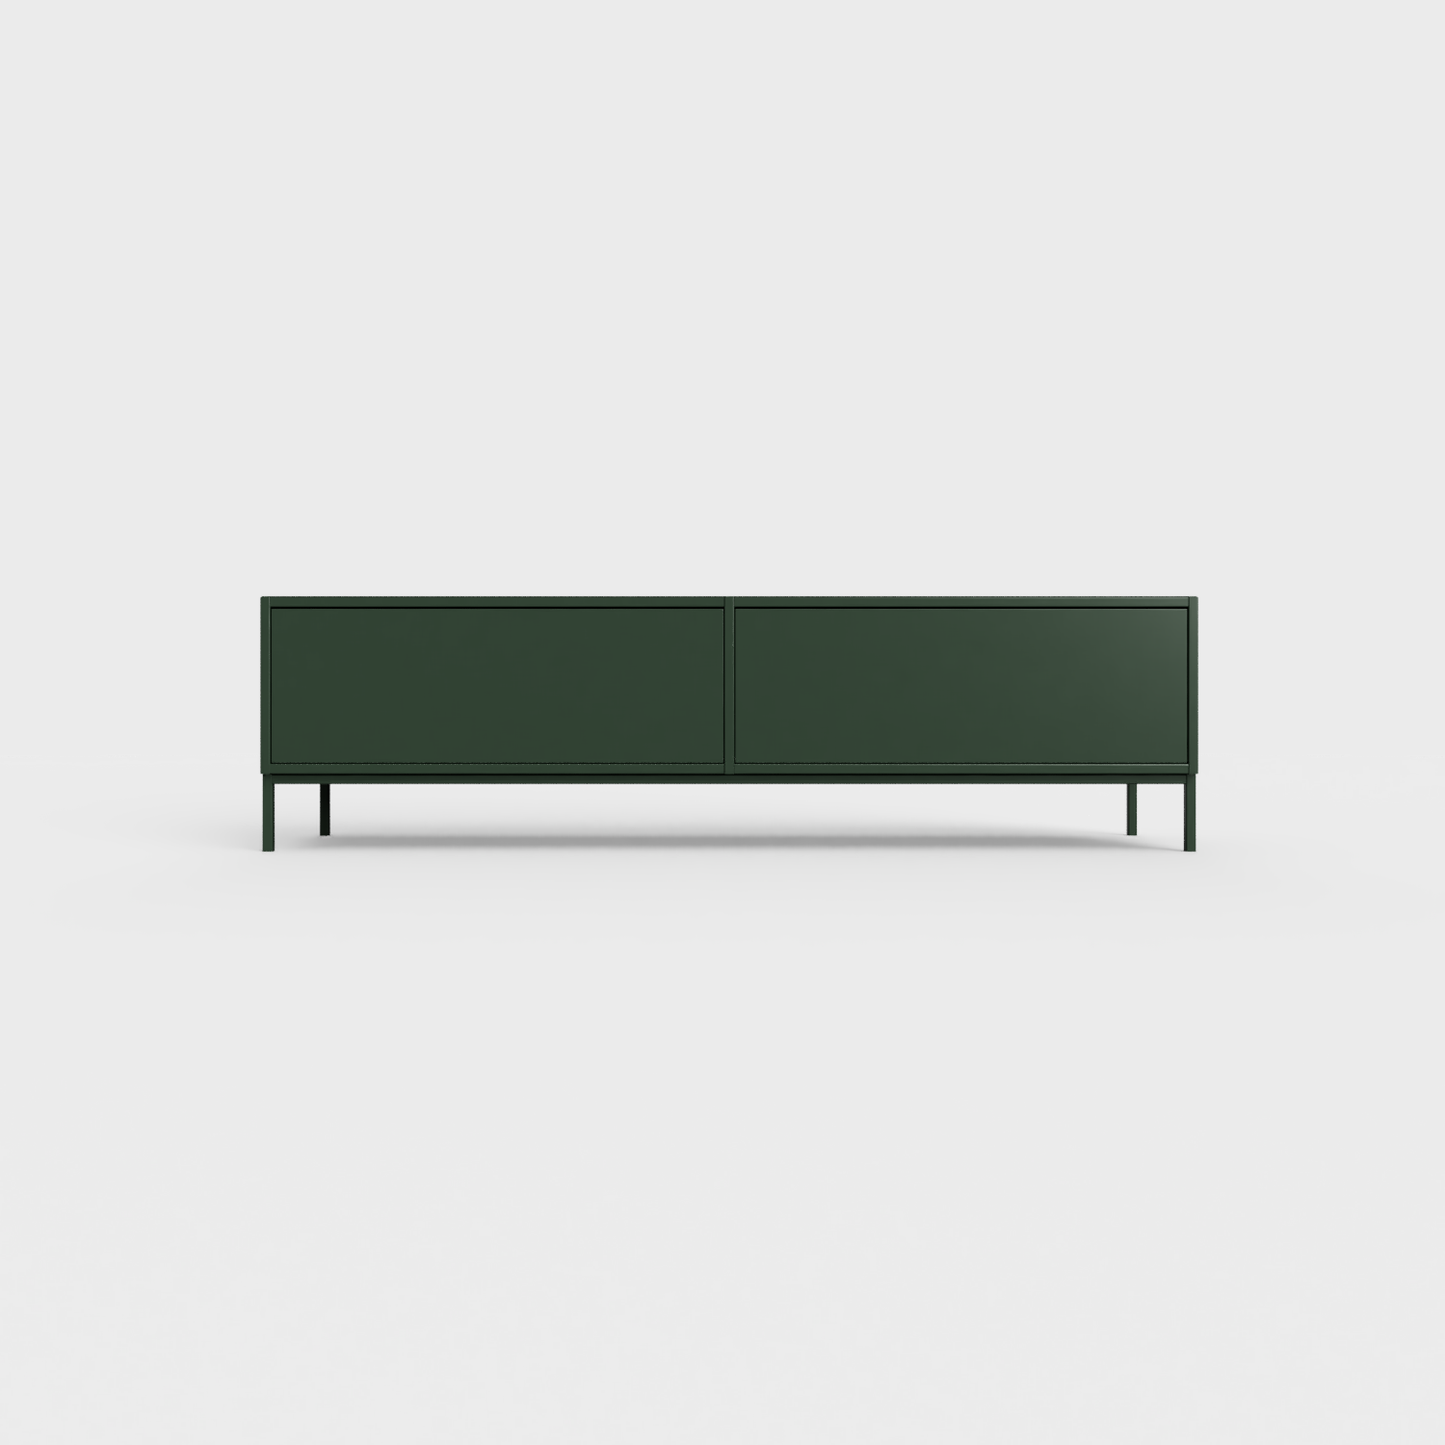 Prunus 01 Lowboard in Bottle Green color, powder-coated steel, elegant and modern piece of furniture for your living room